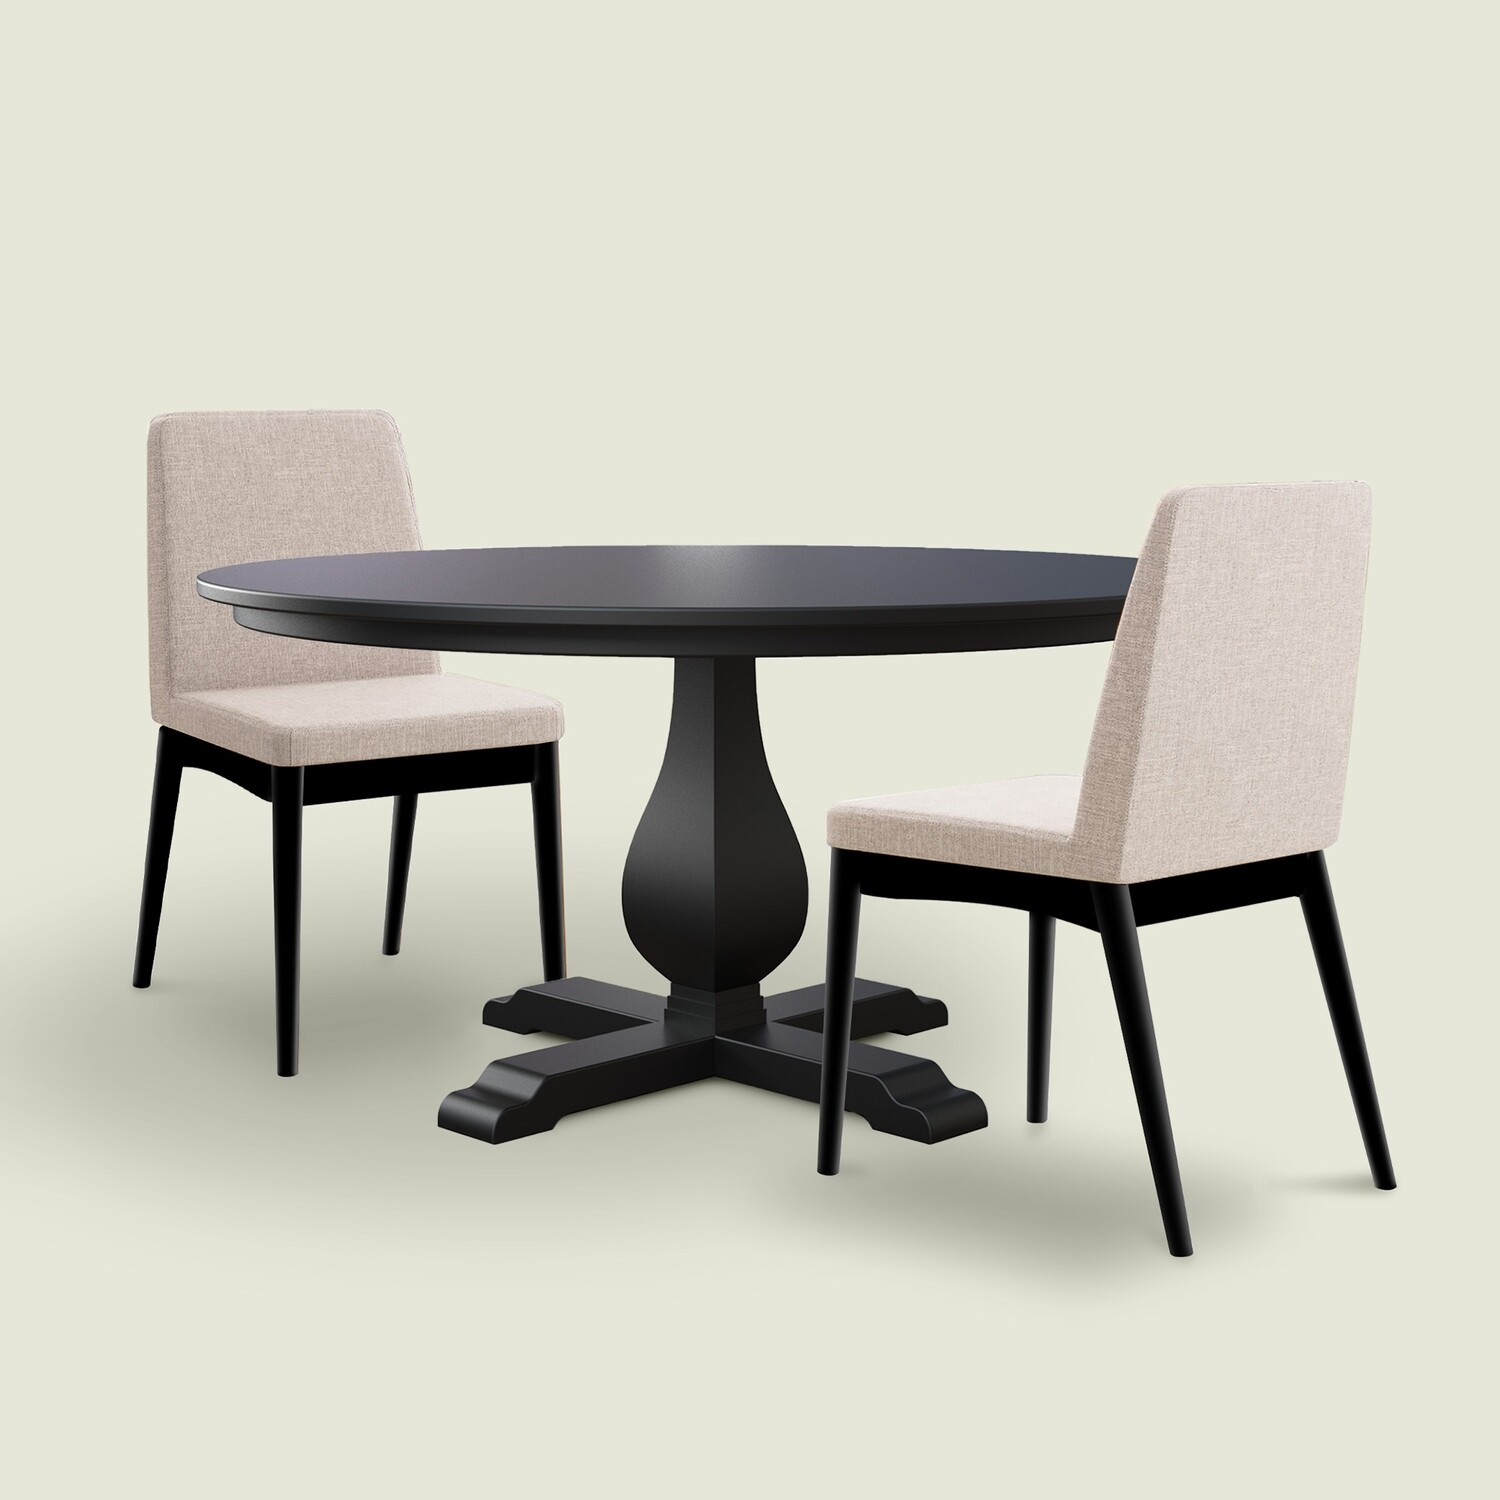 Derbyshire Black Round Dining Table 4 Seater Set